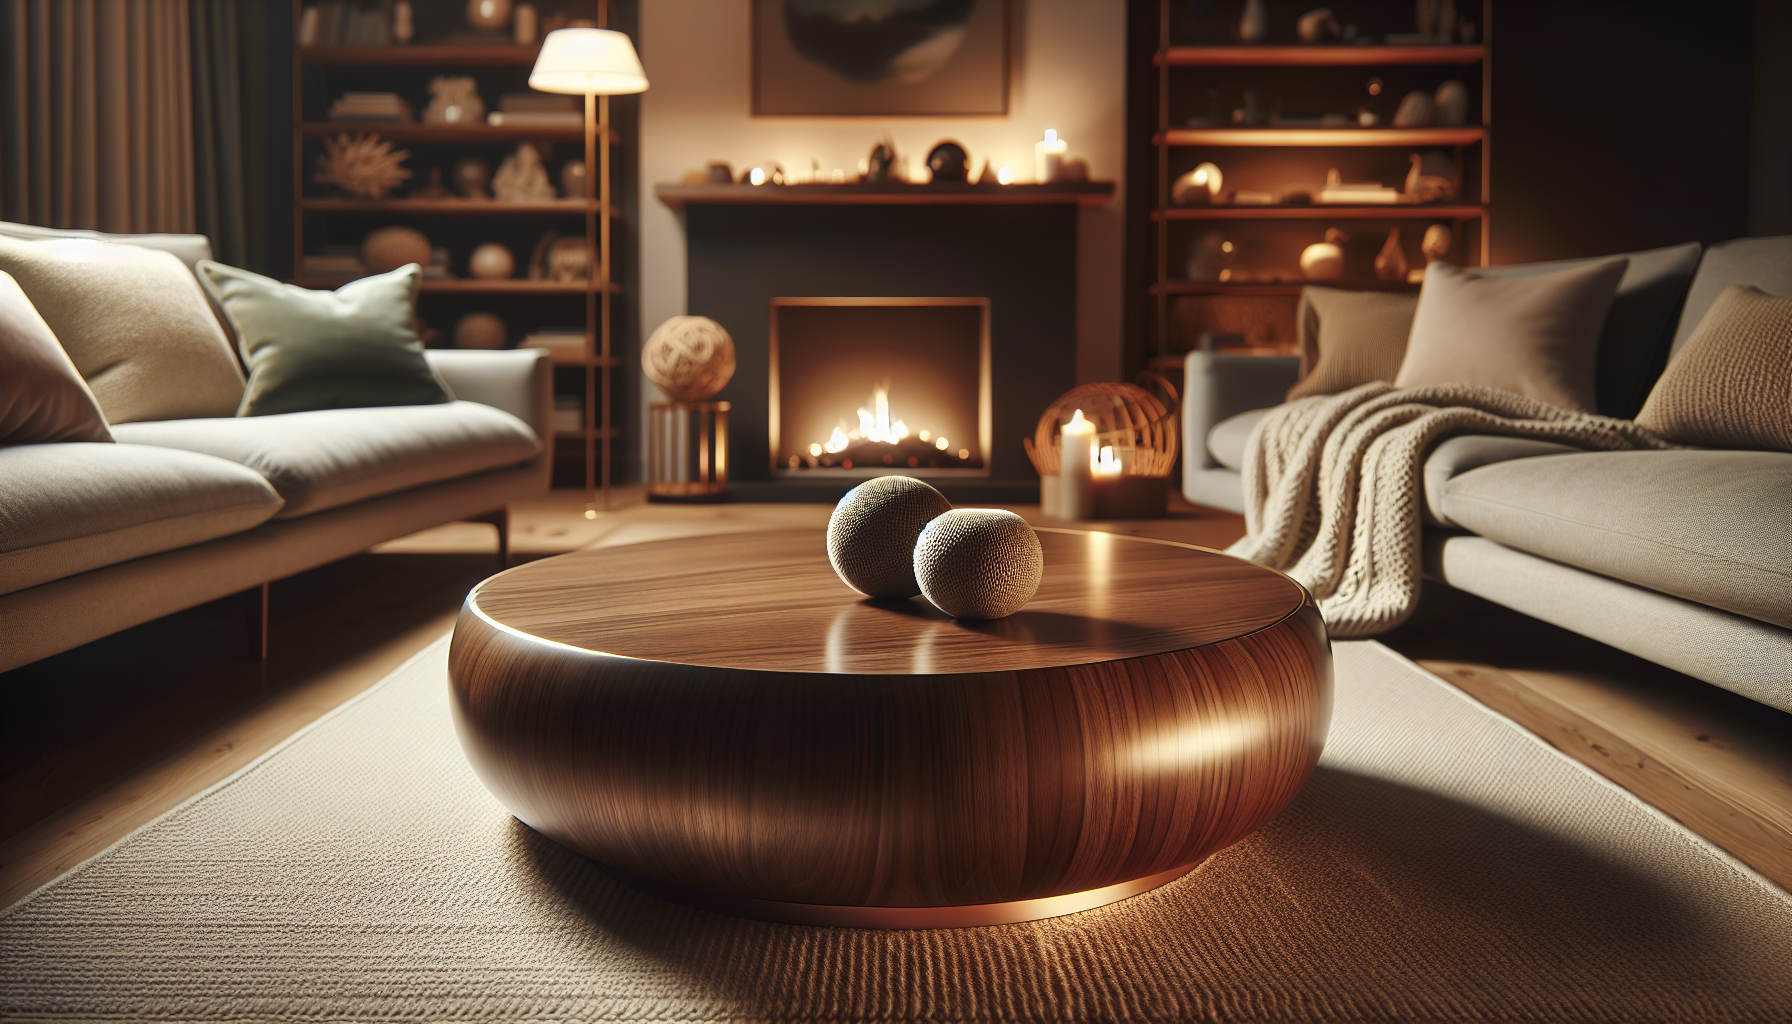 Curved round coffee table complementing a cozy living room